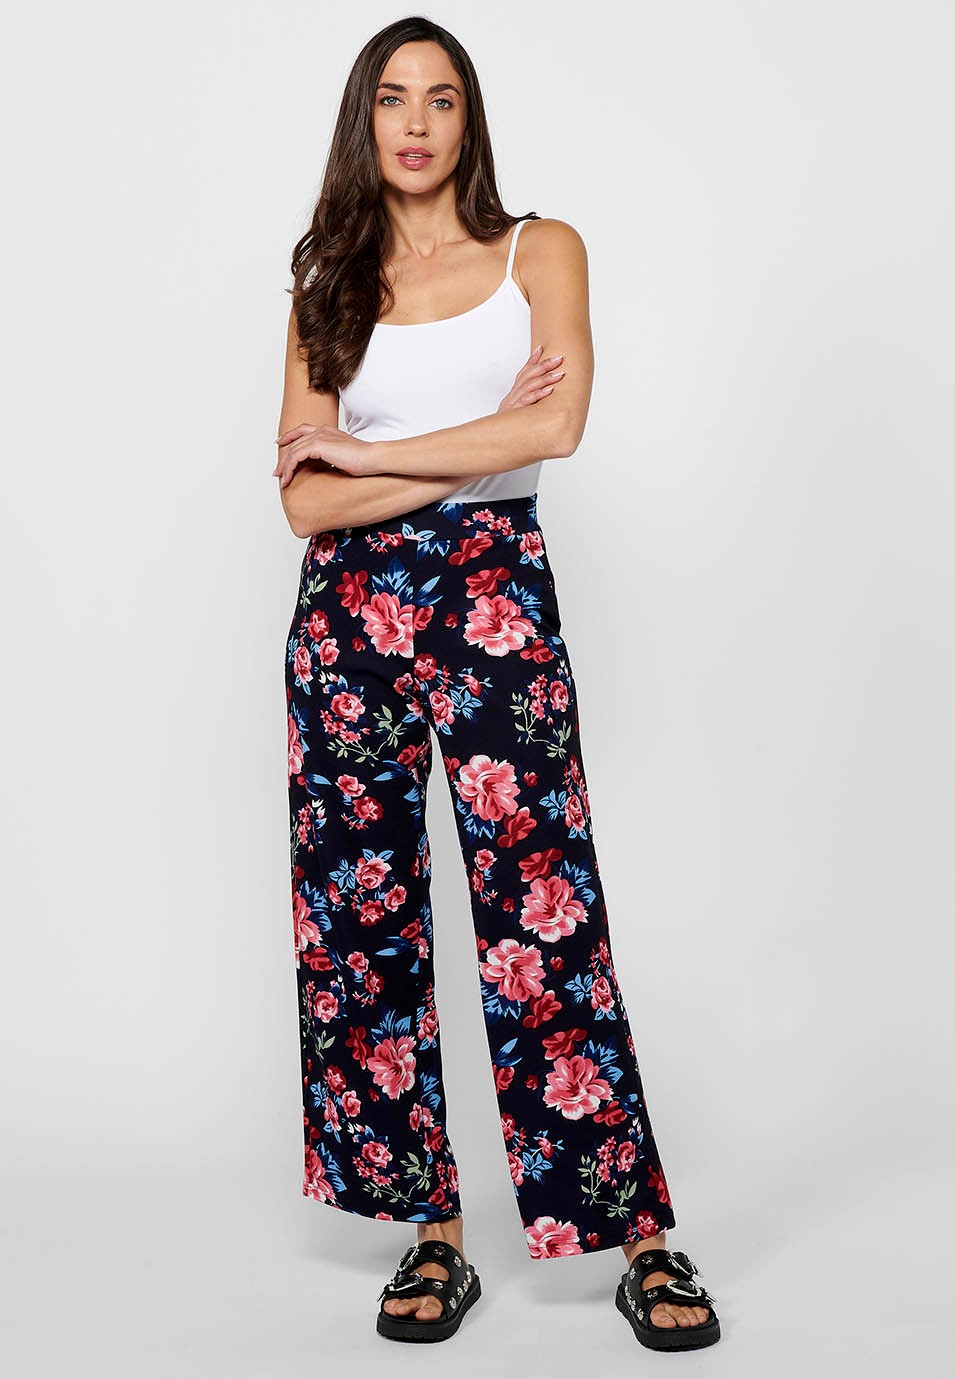 Loose long pants with elastic rubberized waist and Navy floral print for Women